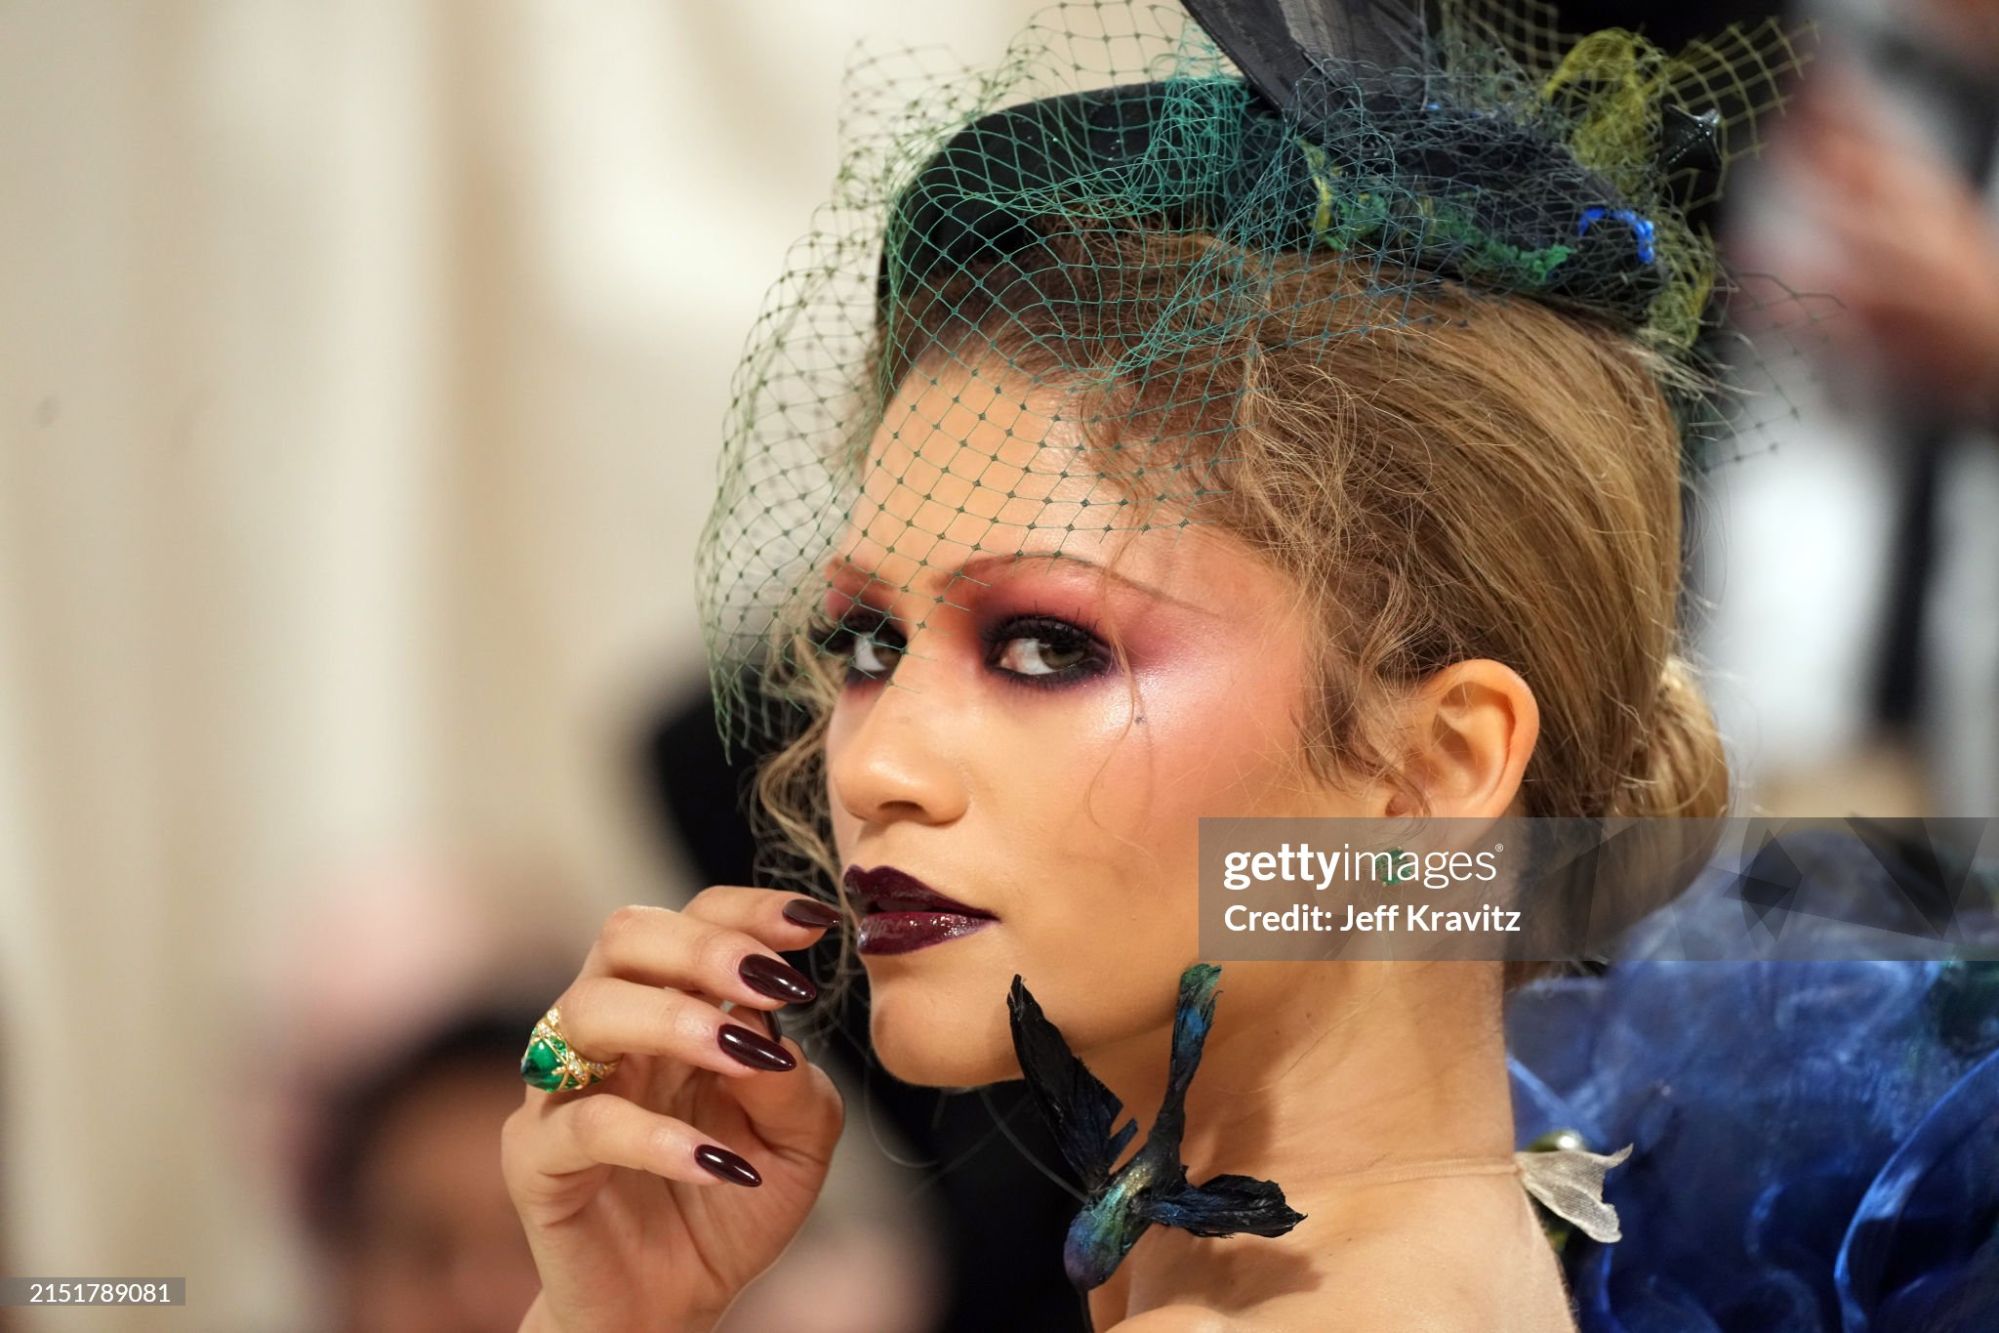 gettyimages-2151789081-2048x2048.jpg